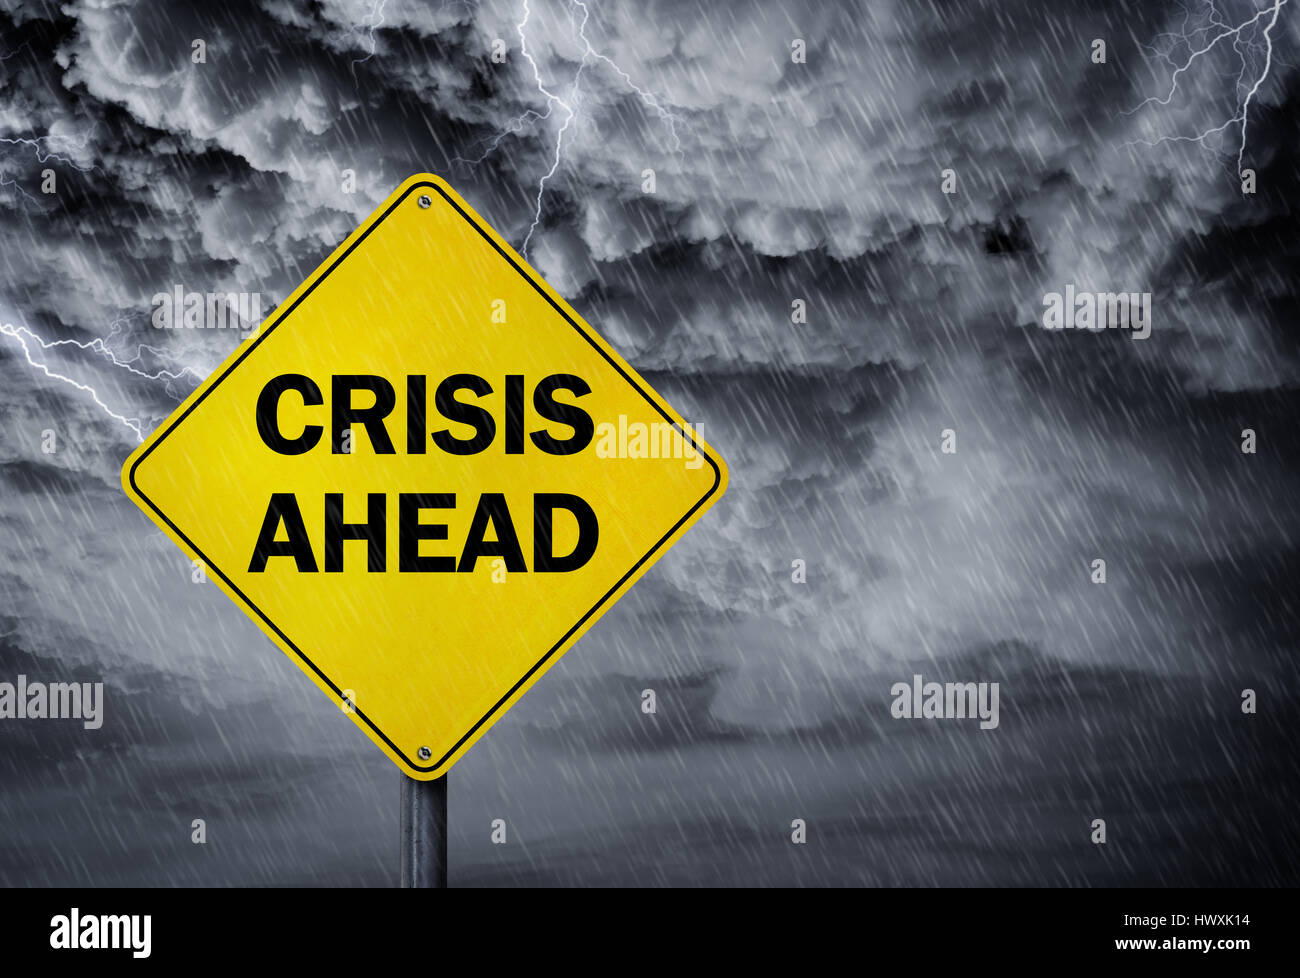 Crisis ahead sign in a rain storm concept for financial problems, risk and economic depression Stock Photo